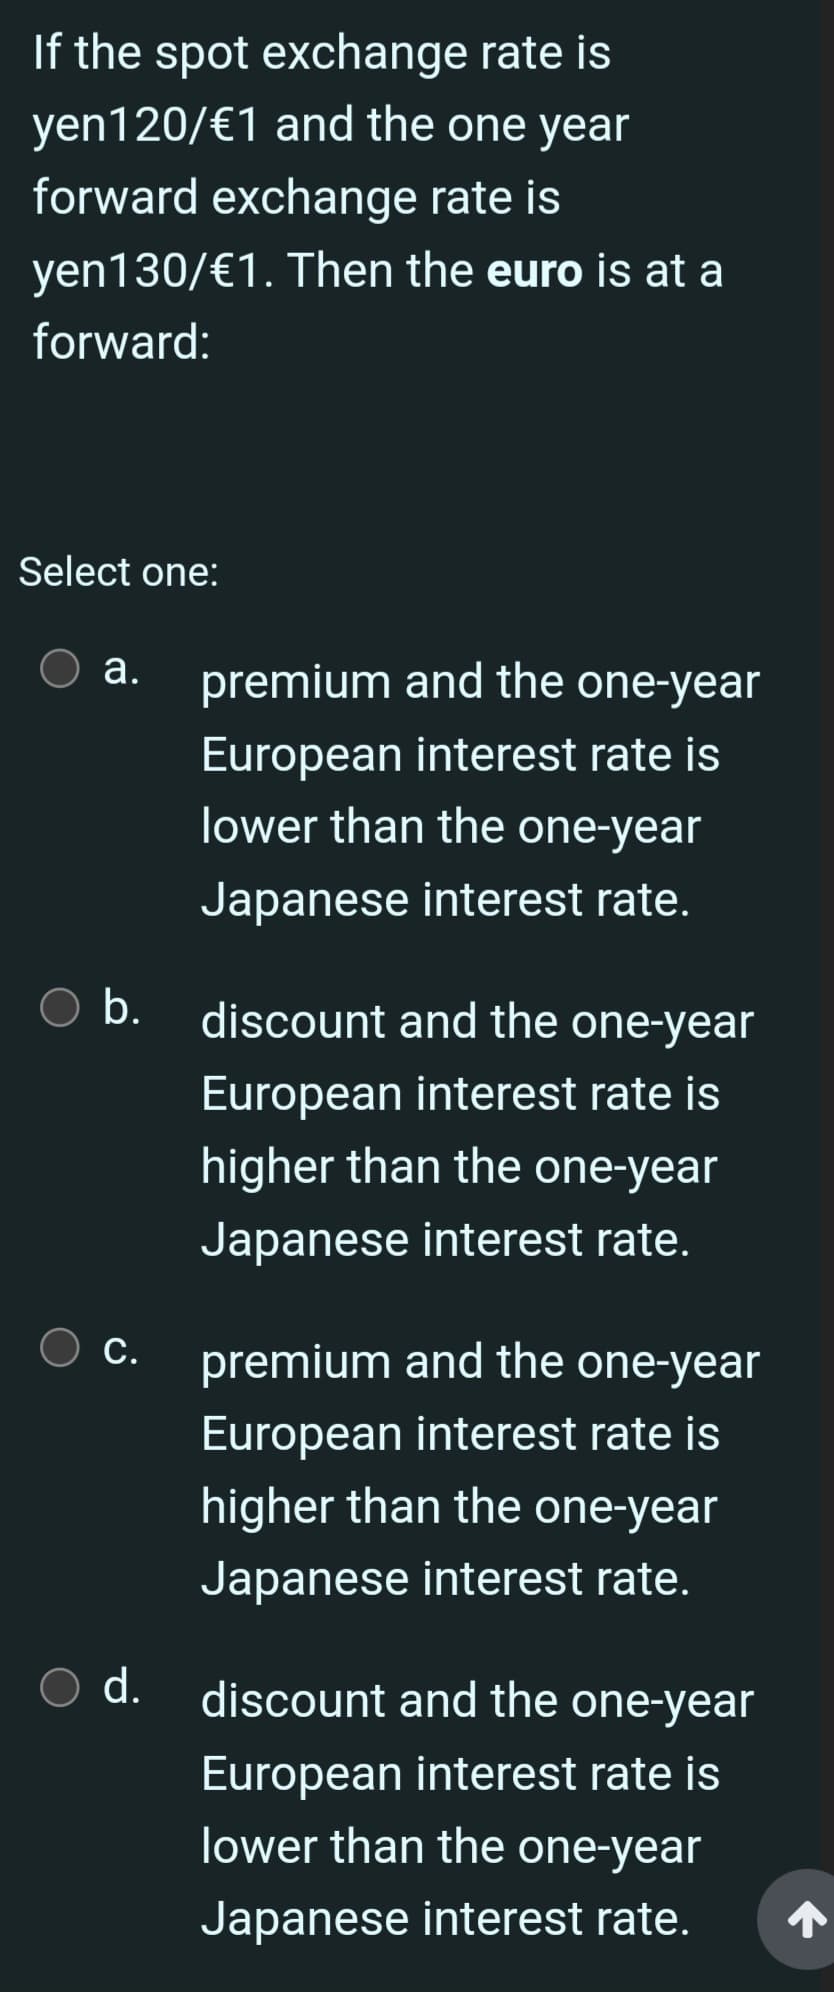 If the spot exchange rate is
yen120/ €1 and the one year
forward exchange rate is
yen130/€1. Then the euro is at a
forward:
Select one:
a.
b.
C.
O d.
premium and the one-year
European interest rate is
lower than the one-year
Japanese interest rate.
discount and the one-year
European interest rate is
higher than the one-year
Japanese interest rate.
premium and the one-year
European interest rate is
higher than the one-year
Japanese interest rate.
discount and the one-year
European interest rate is
lower than the one-year
Japanese interest rate.